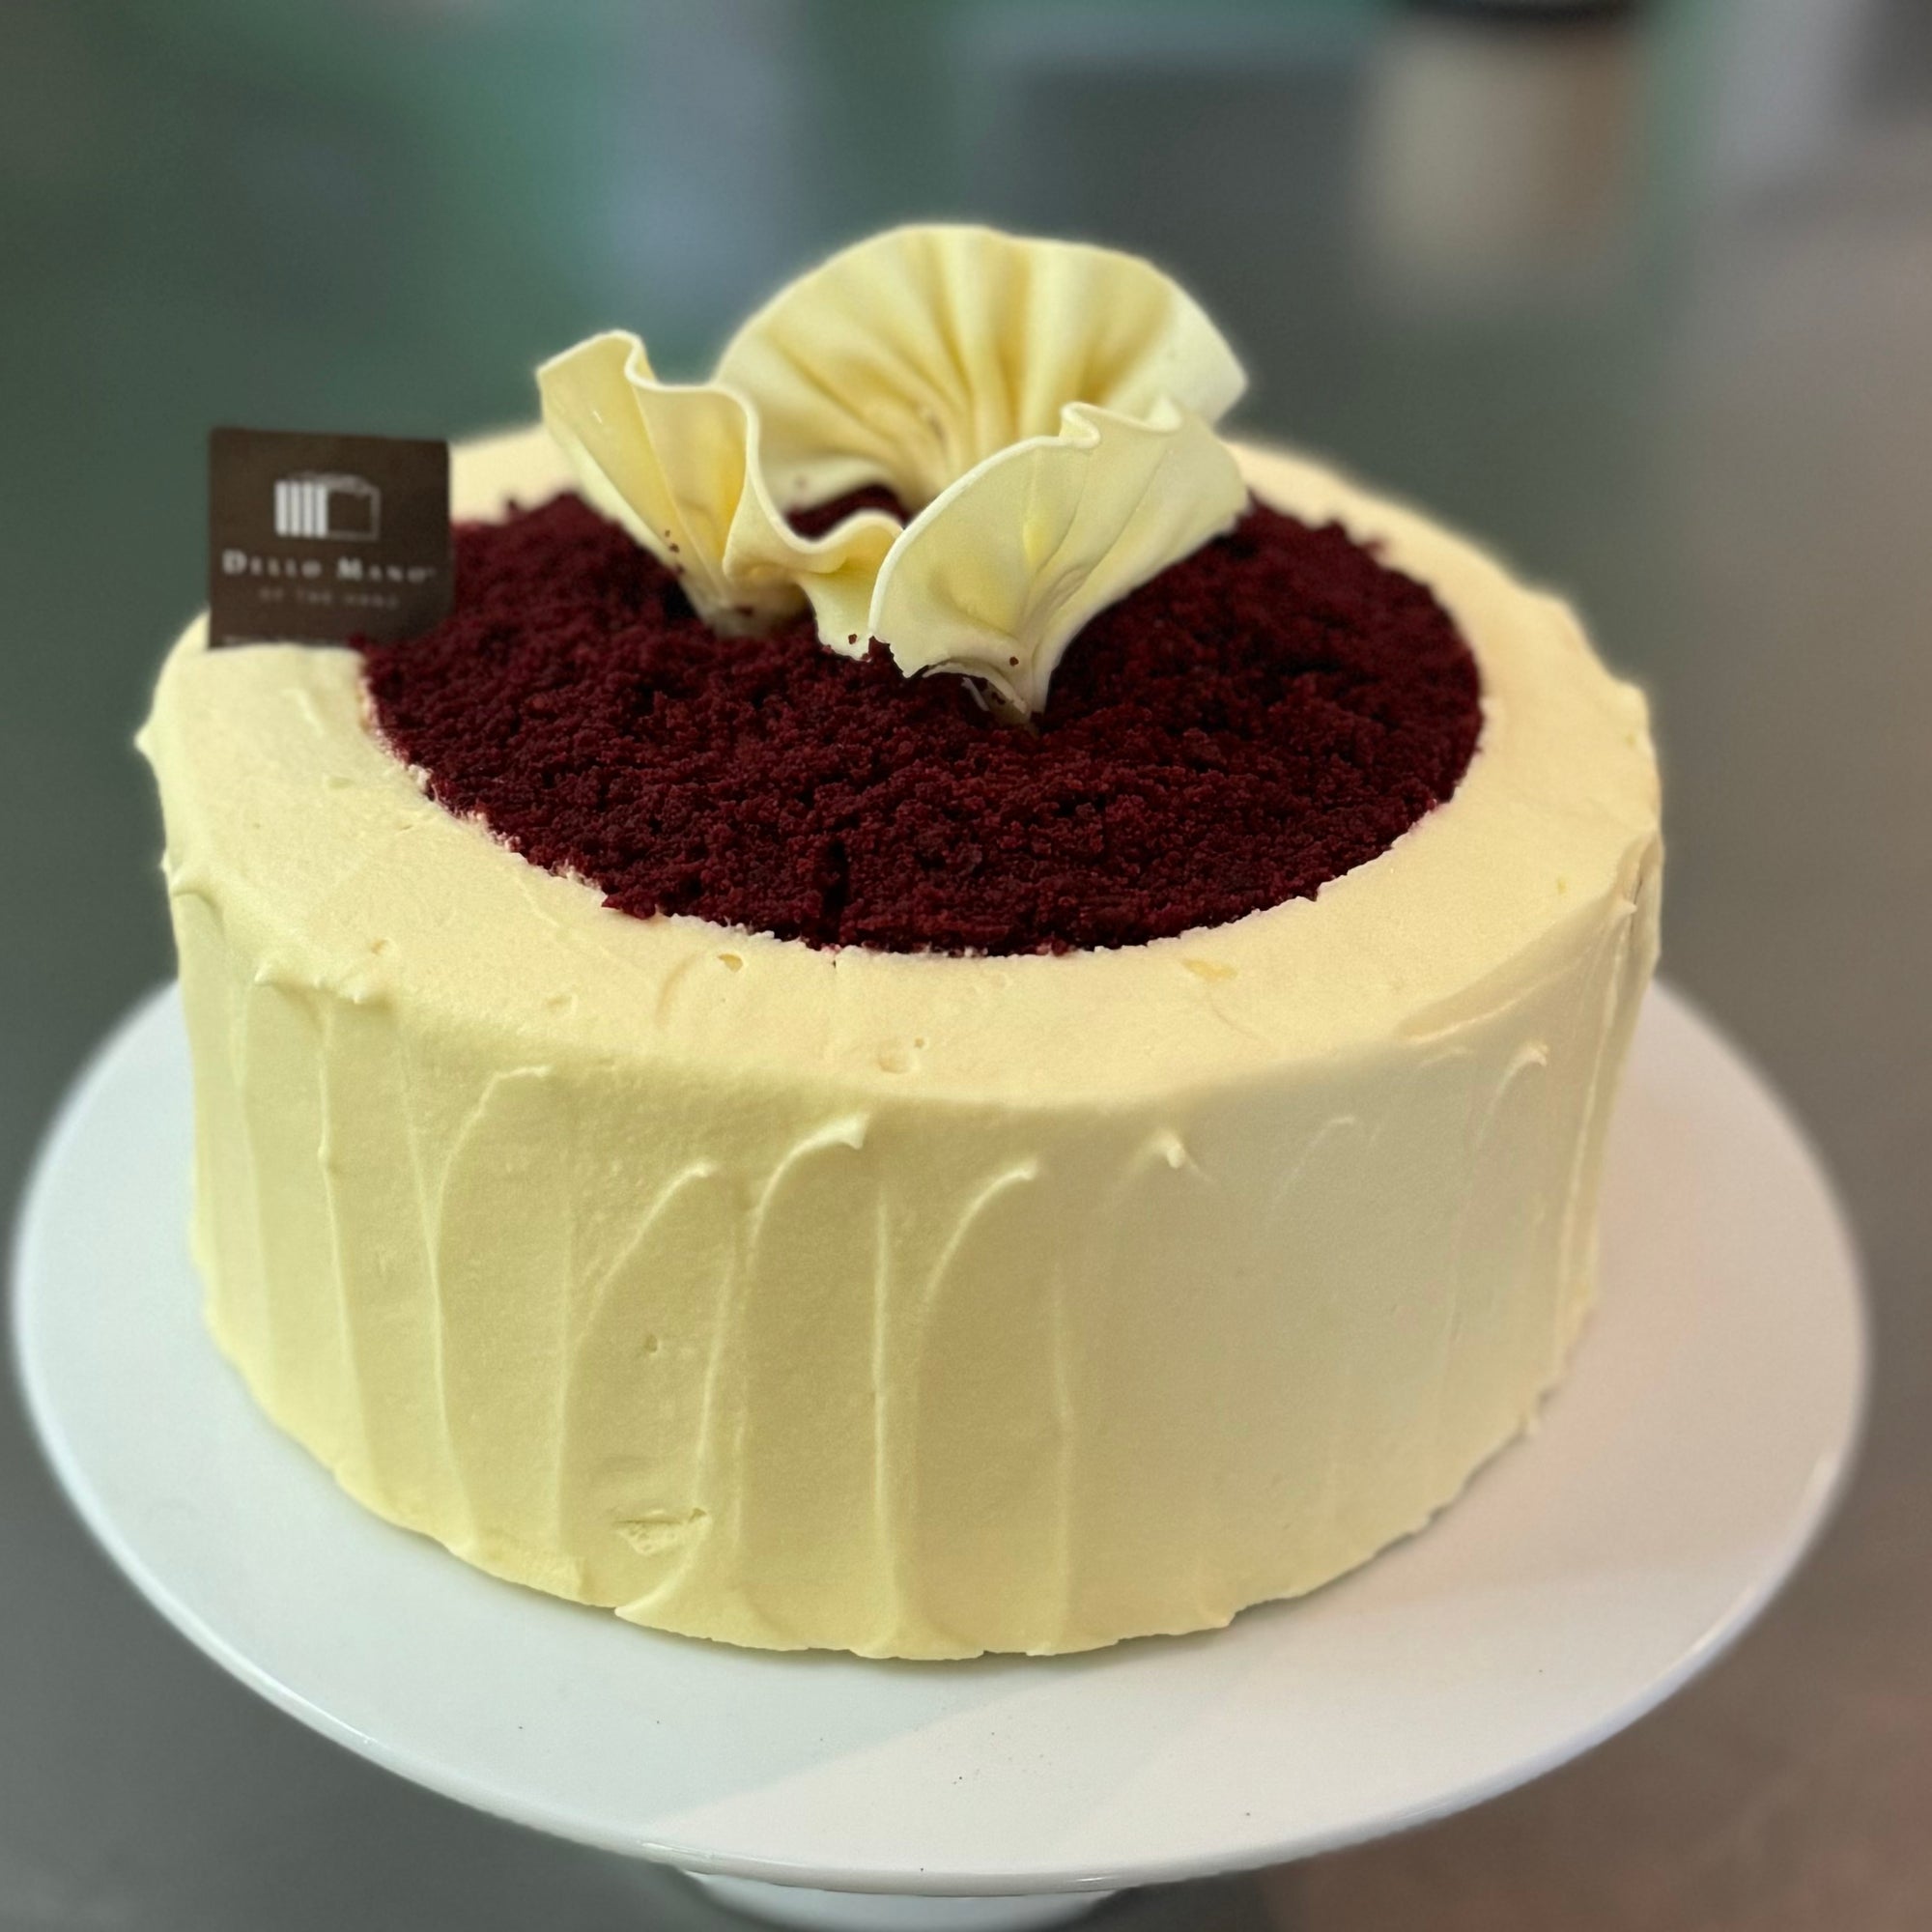 A Red Velvet Cake finished with red crumbs and handmade white Belgian Chocolate Fans and a tag that says Dello Mano